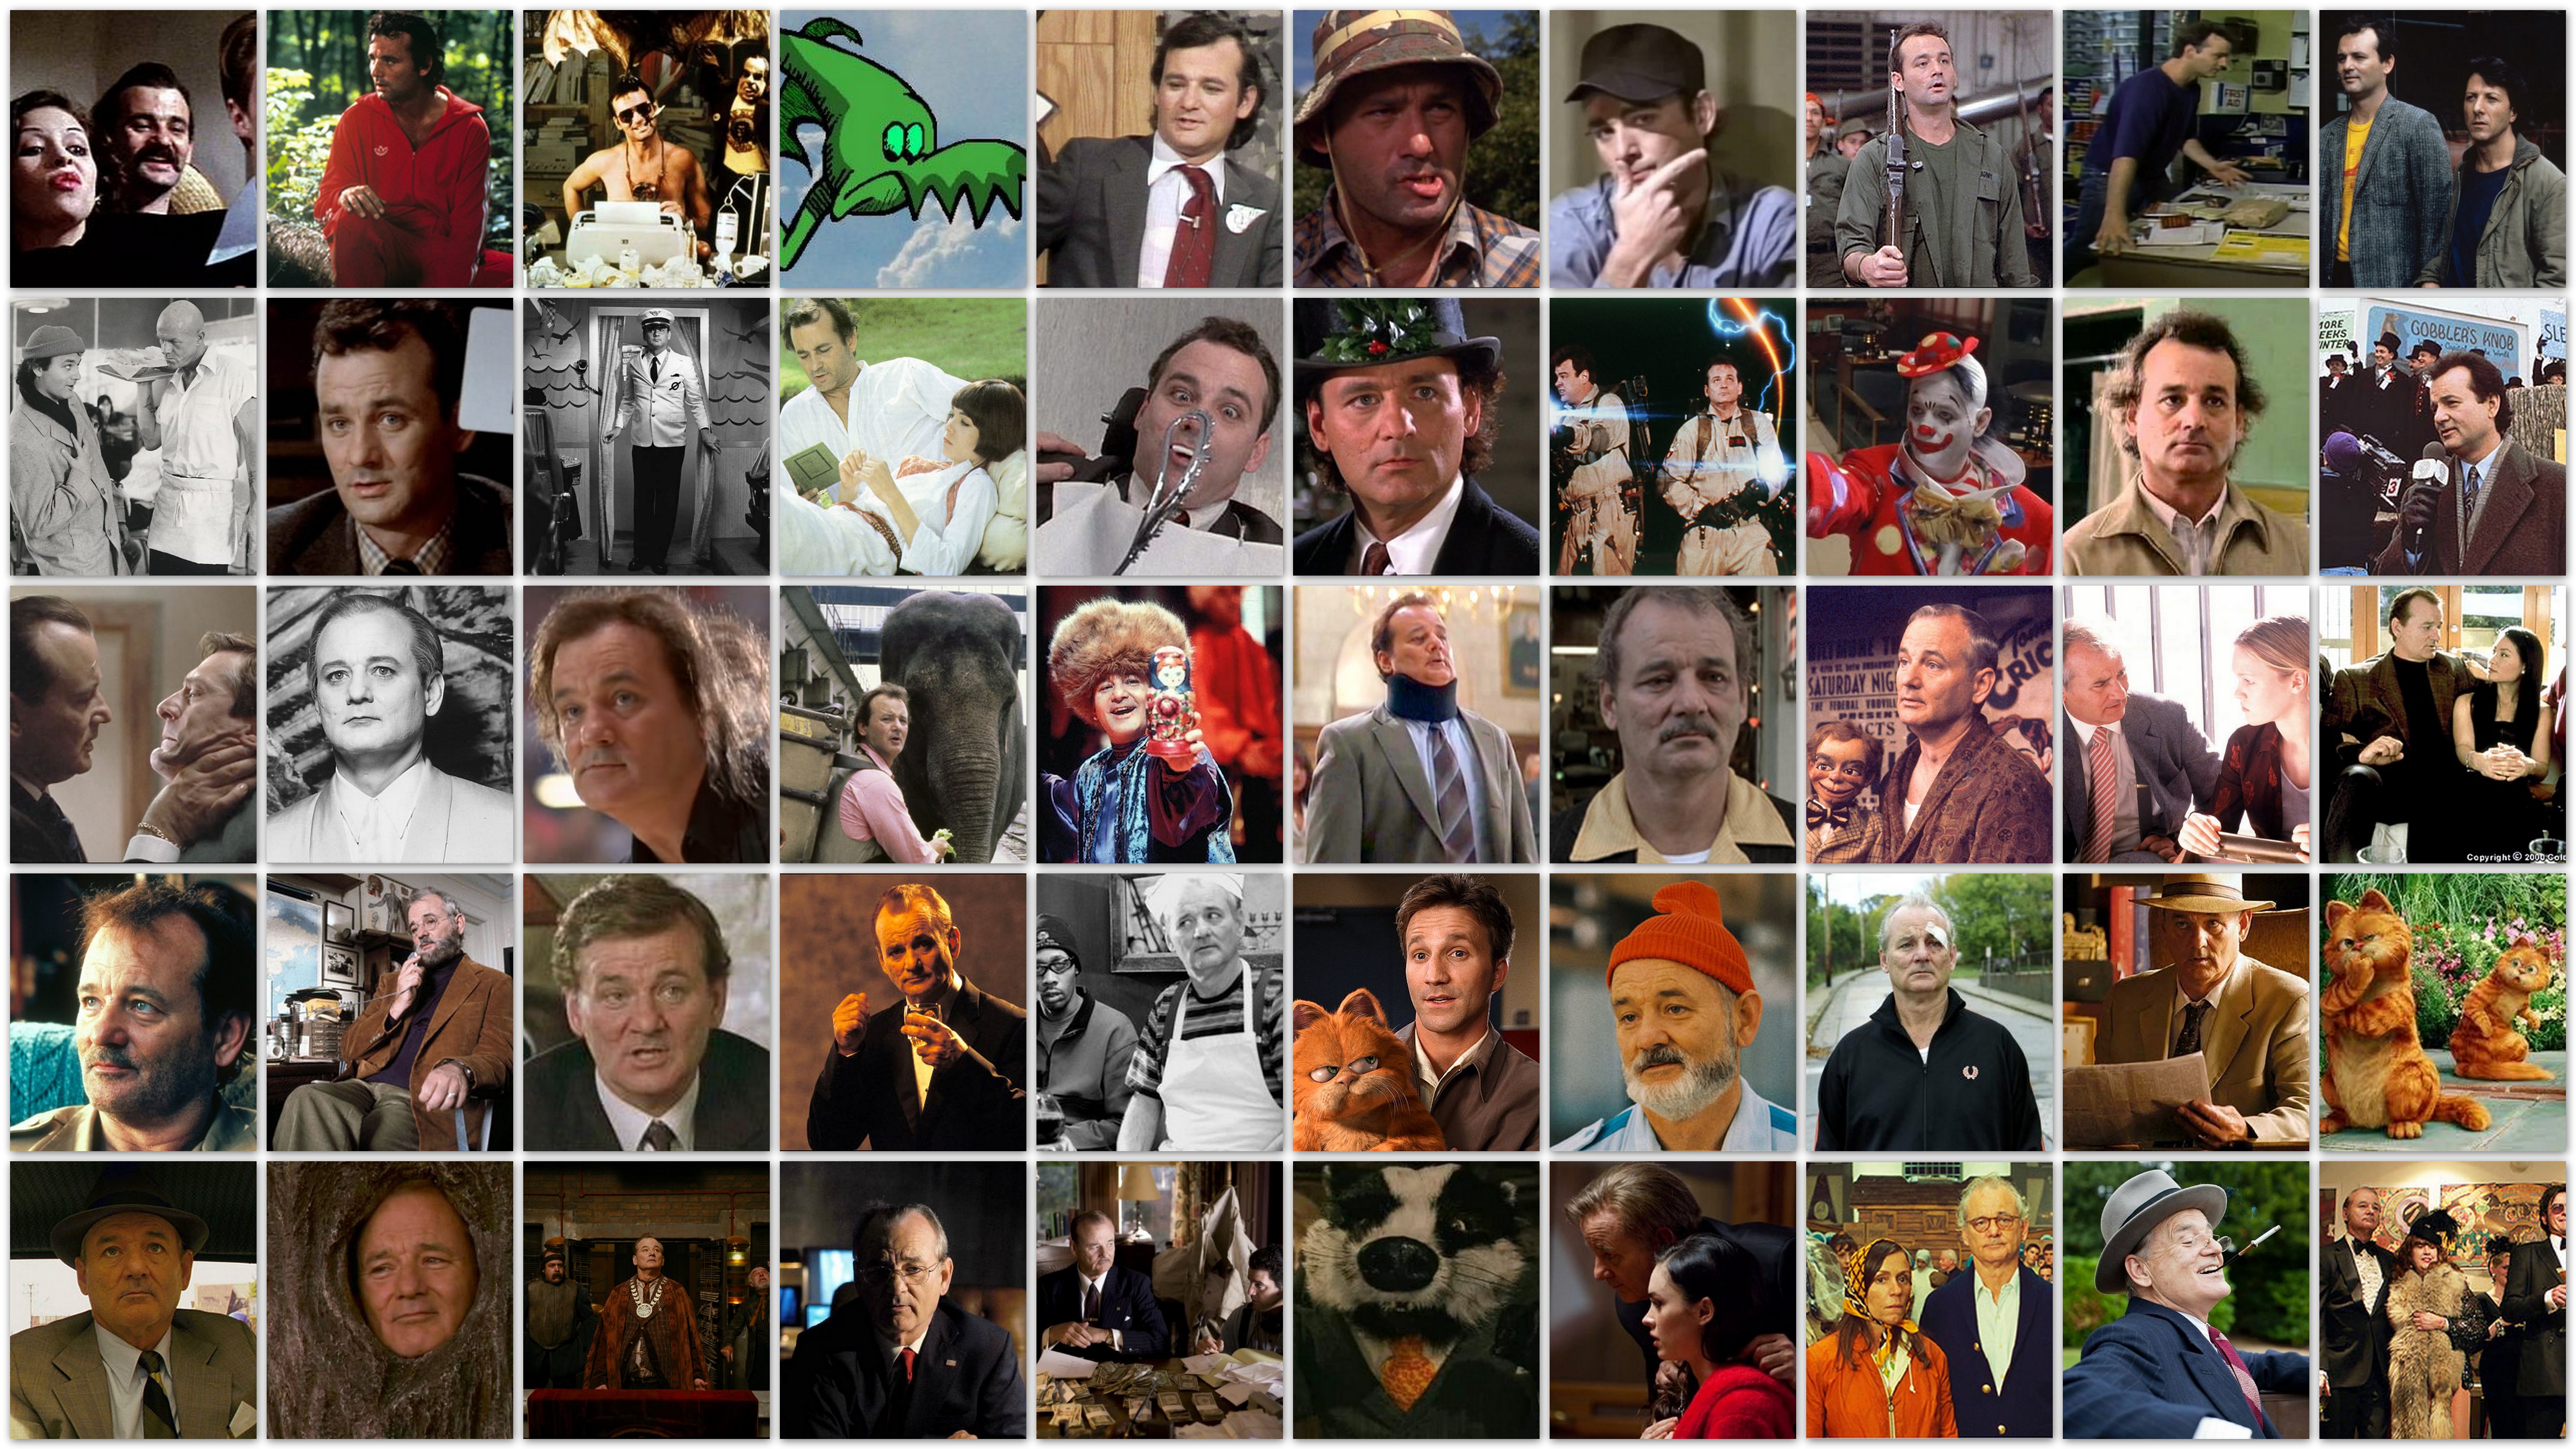 Overview roles and movies of actor Bill Murray